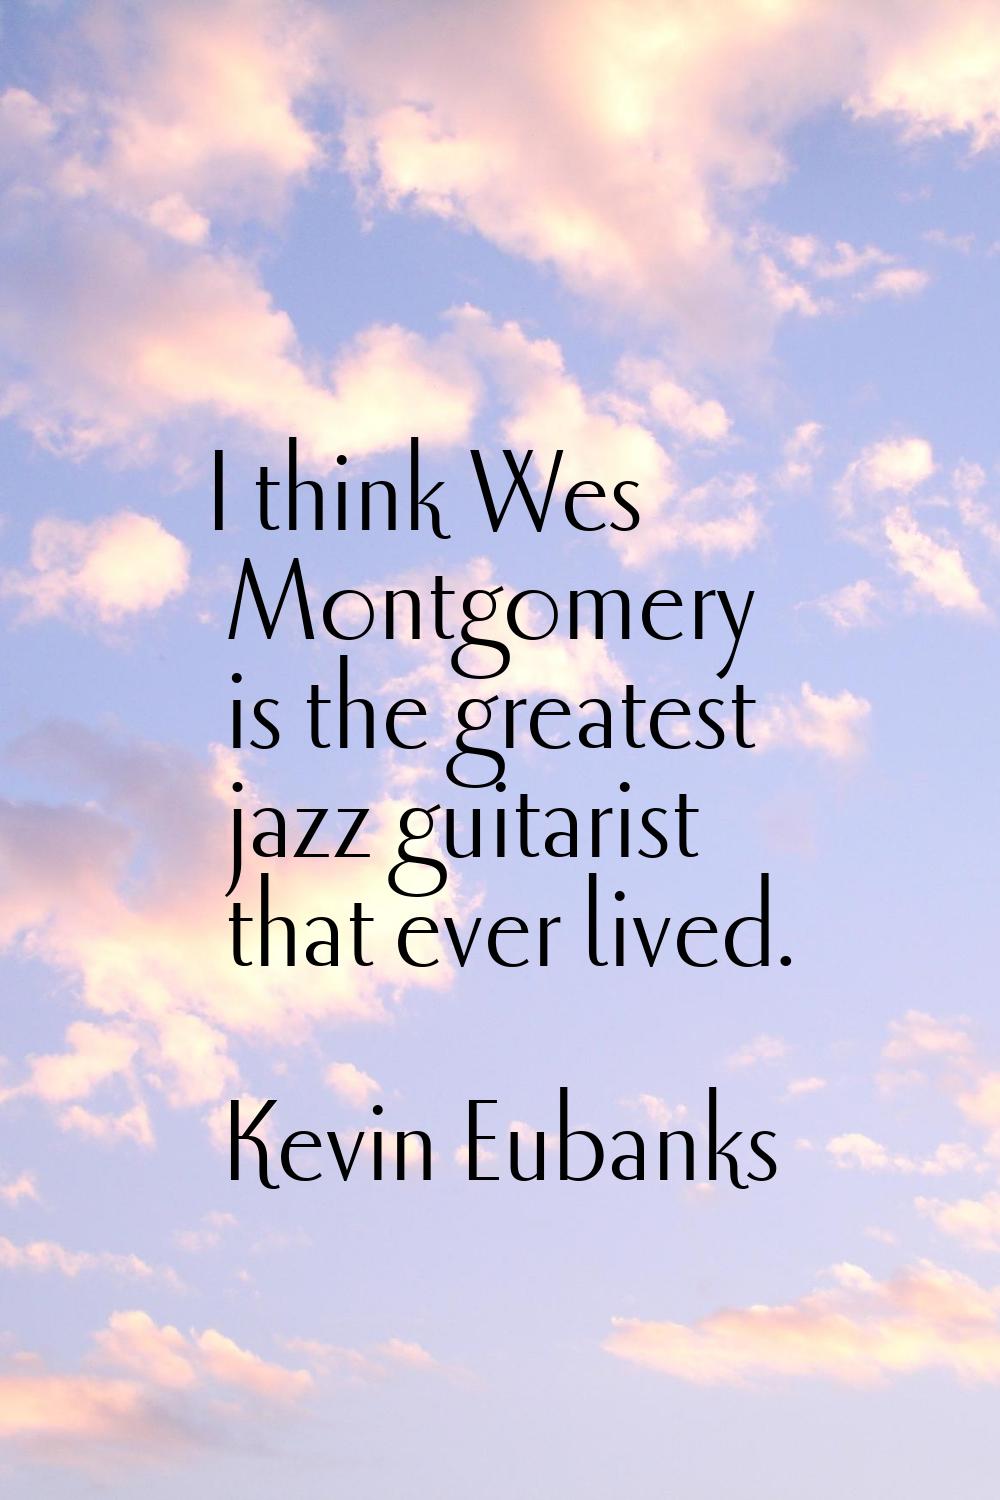 I think Wes Montgomery is the greatest jazz guitarist that ever lived.